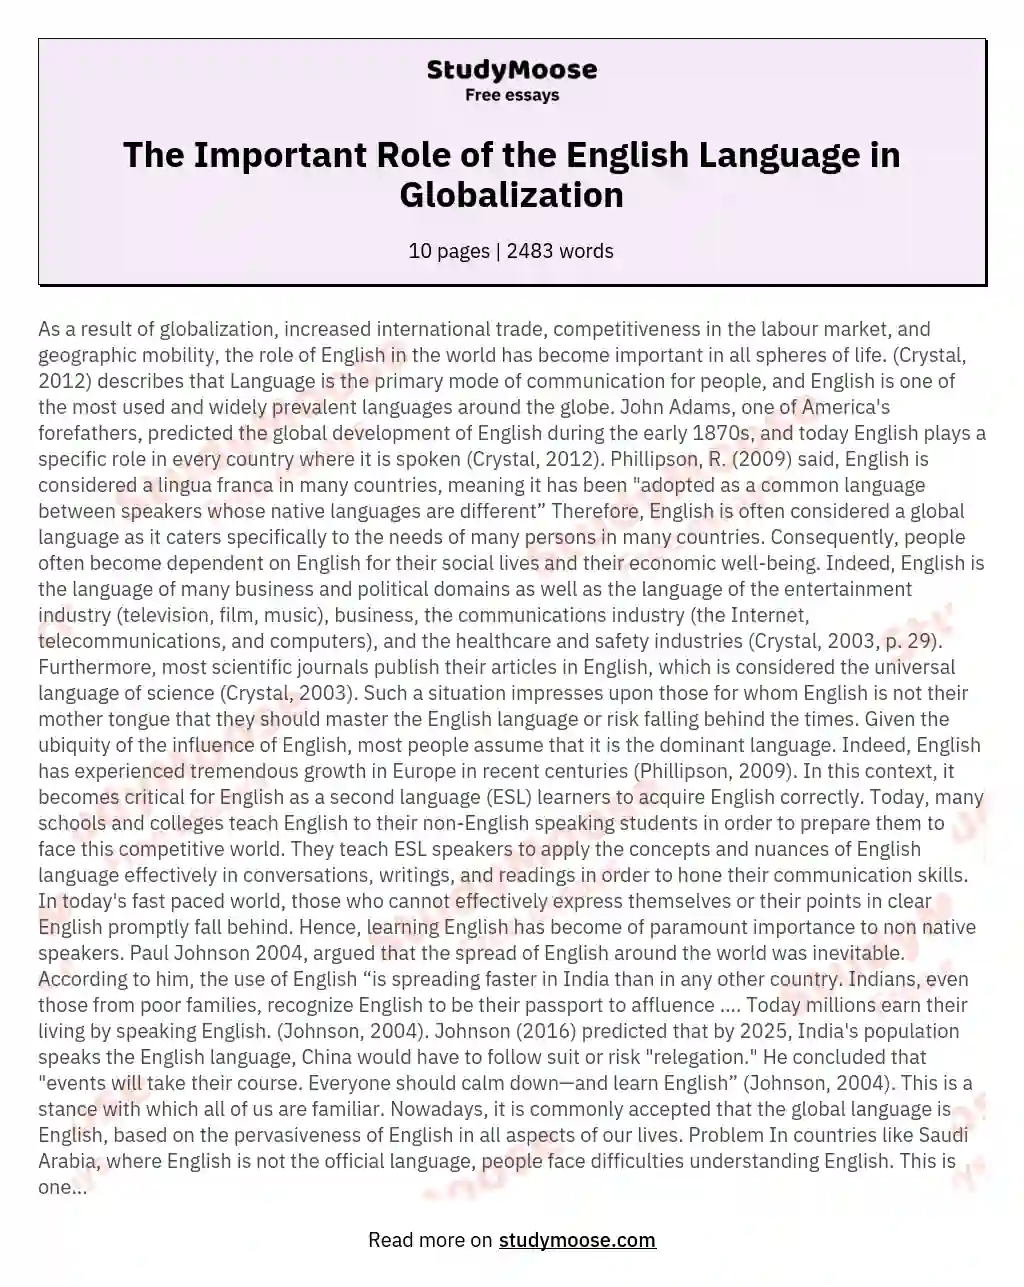 The Important Role of the English Language in Globalization essay